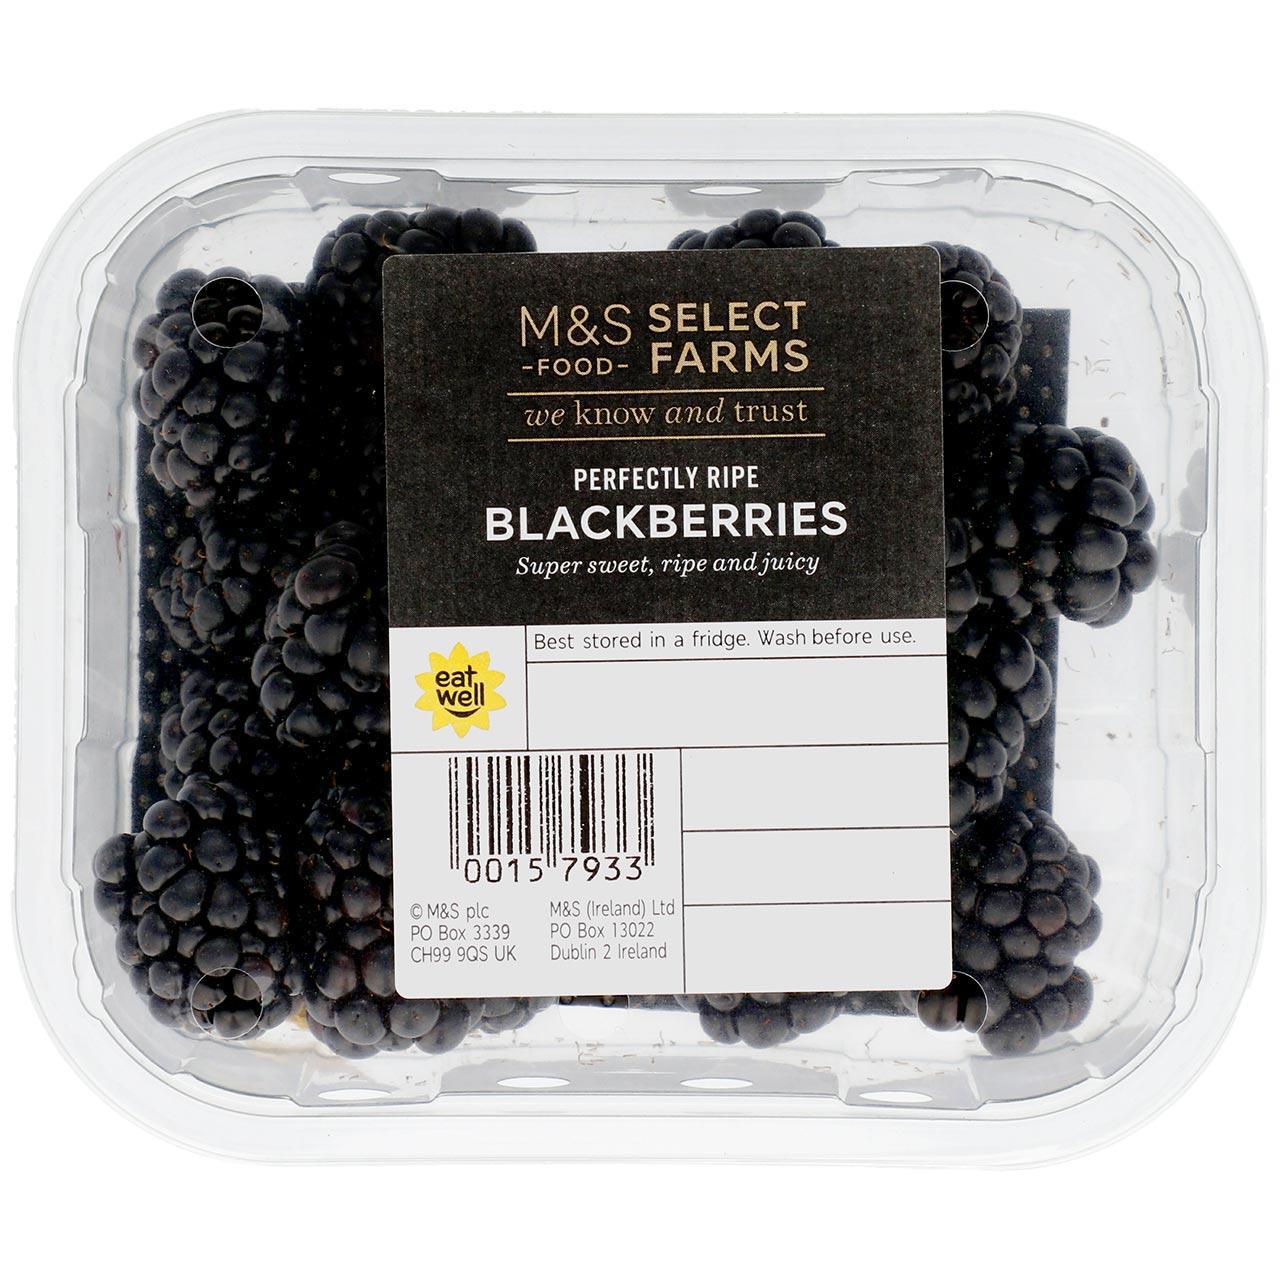 M&S Select Farms Blackberries Perfectly Ripe 150g